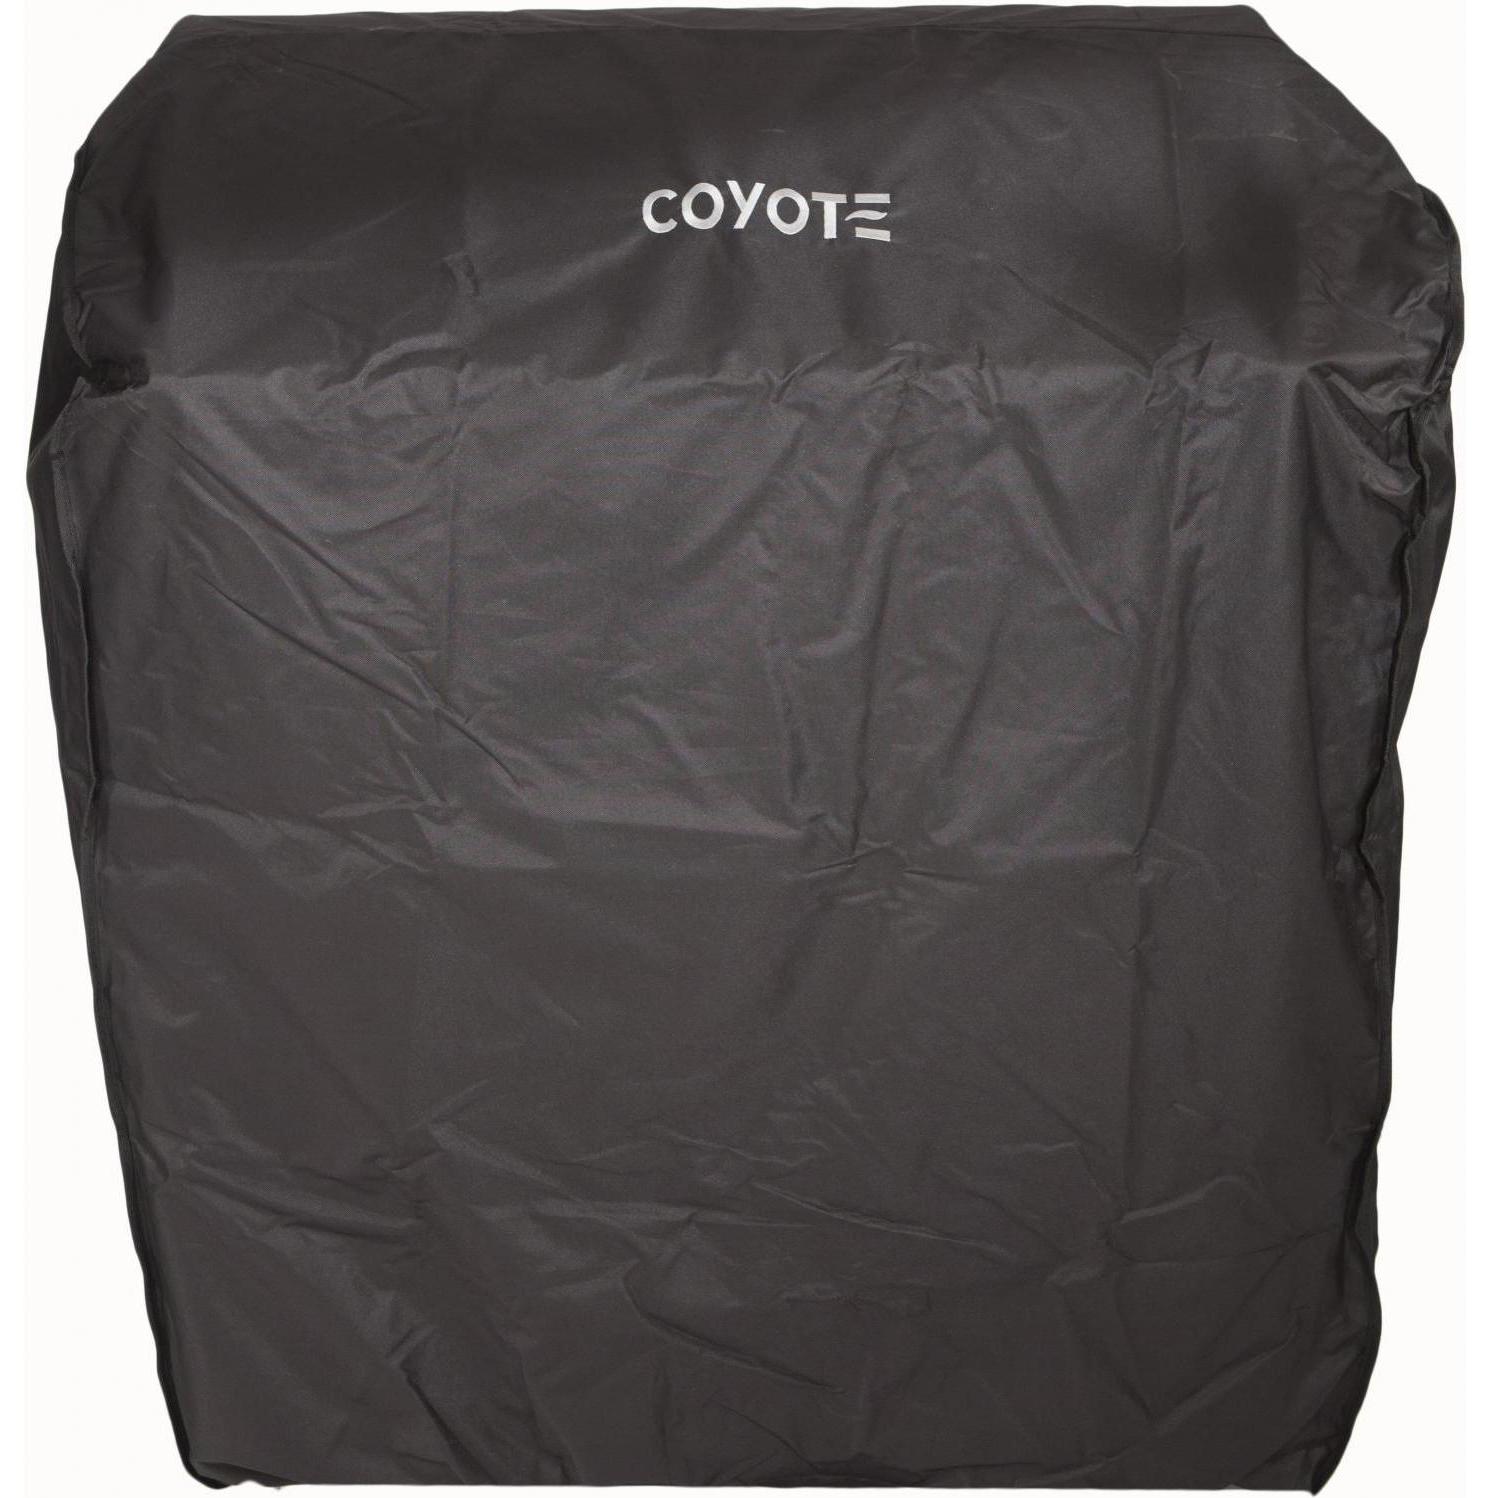 Coyote Outdoor Living 28” Grill Cover-Black